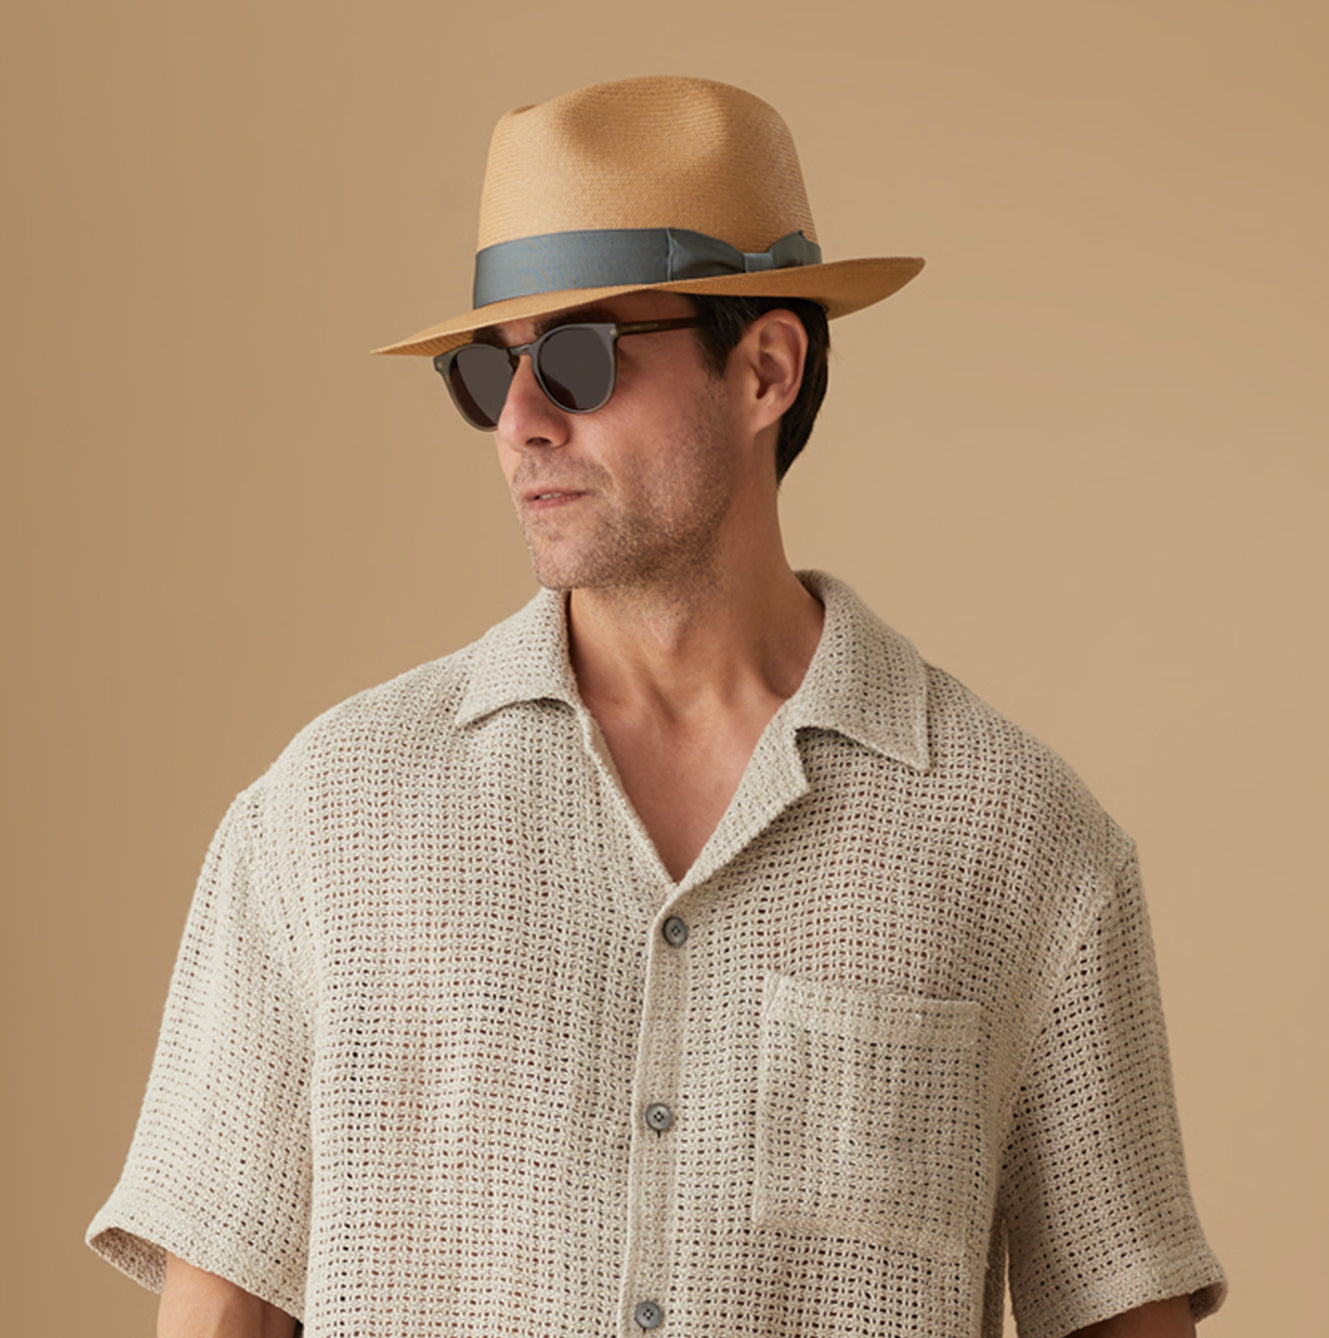 How to Clean your Panama Hat